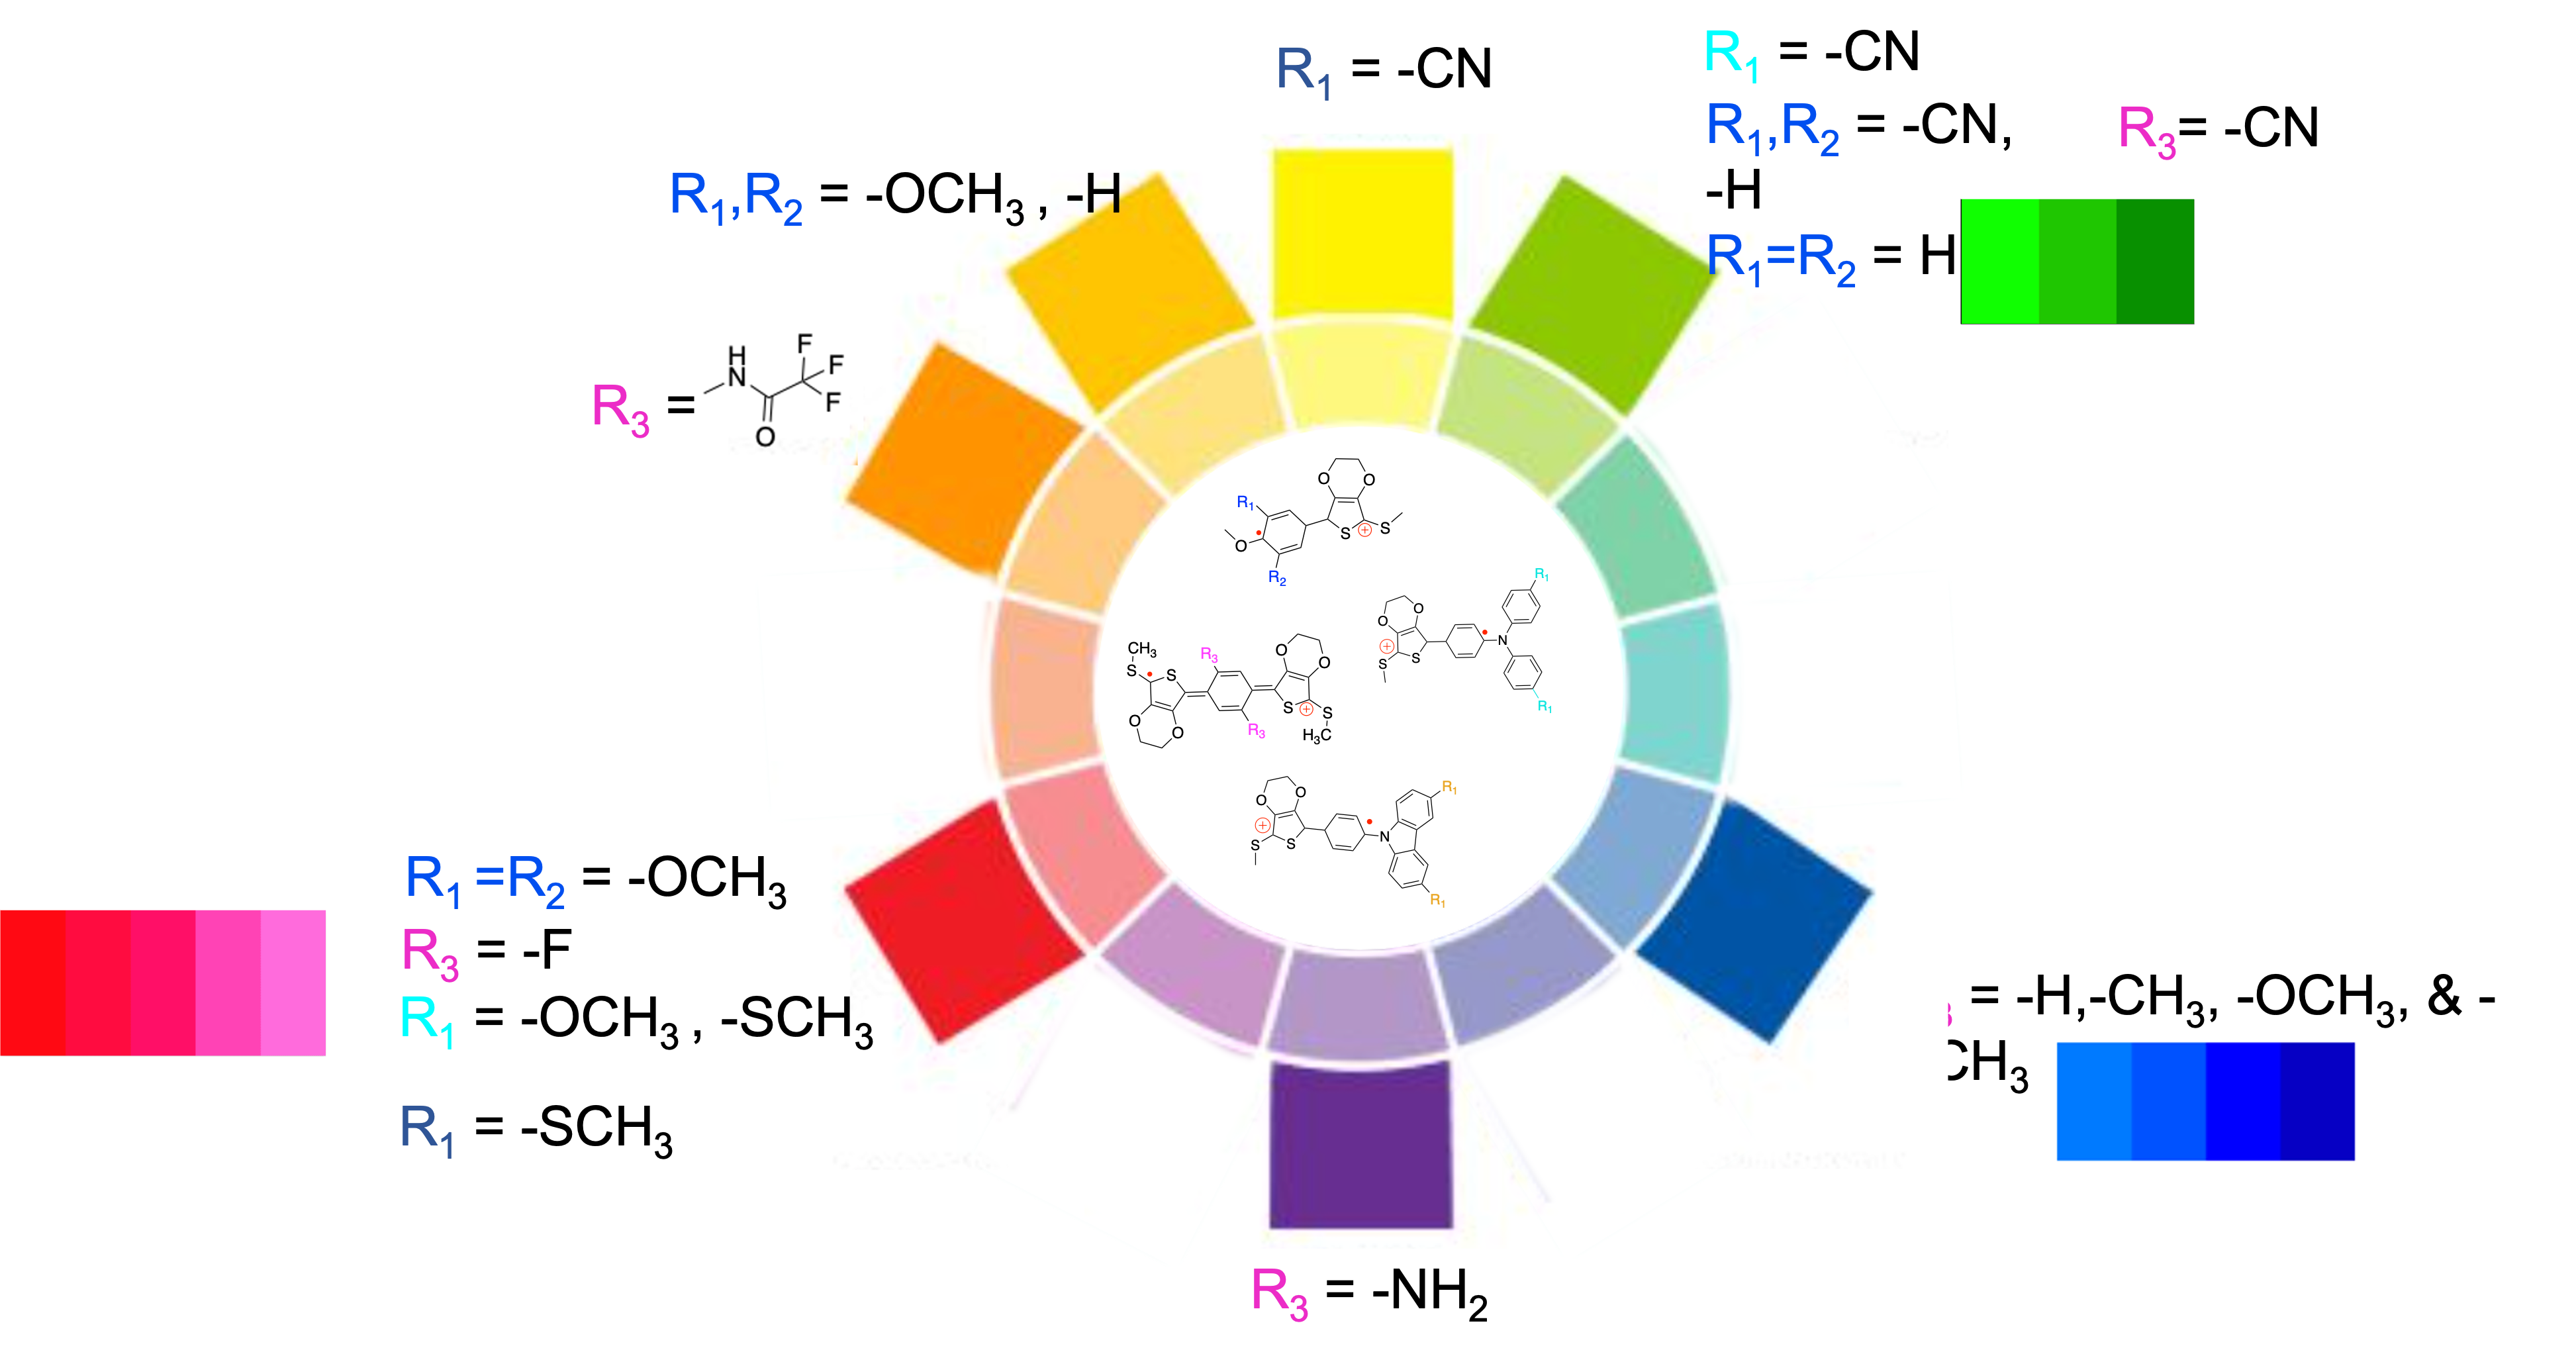 Overall Color Palette Display for Unique ACE Chromophores